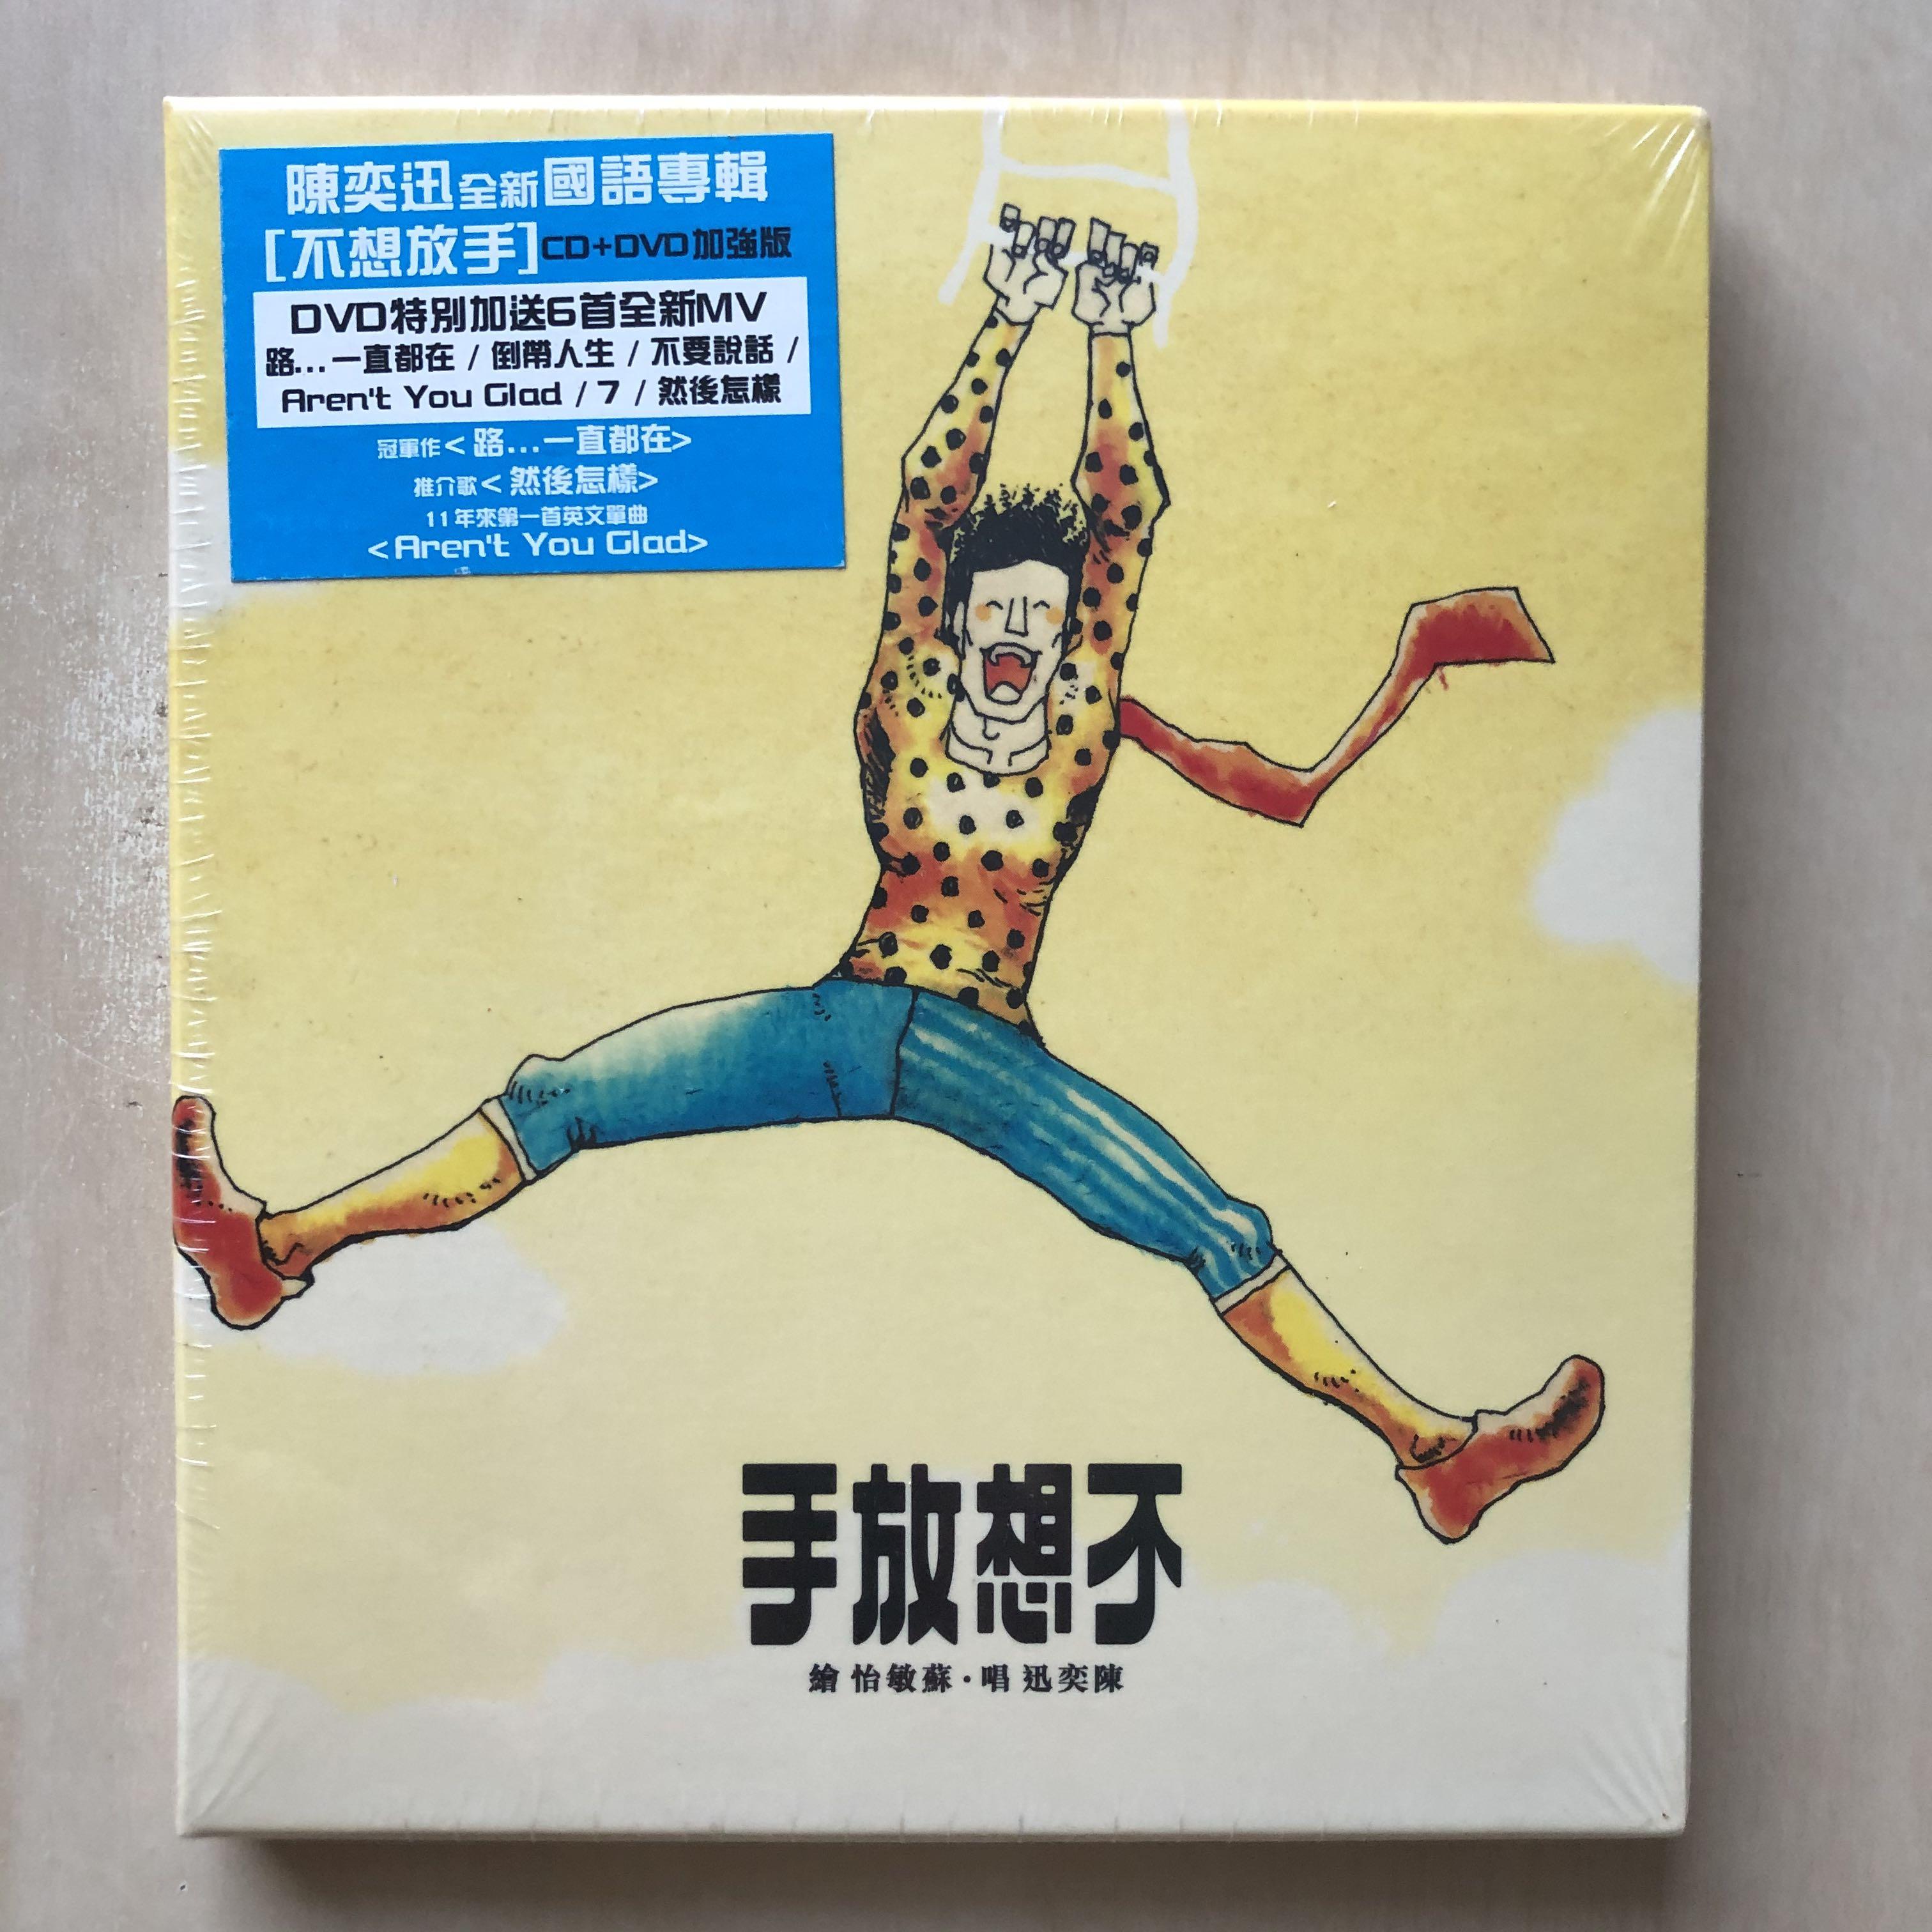 CD丨陳奕迅不想放手(CD+DVD 加強版) / Eason Chan Don't Want To Let 